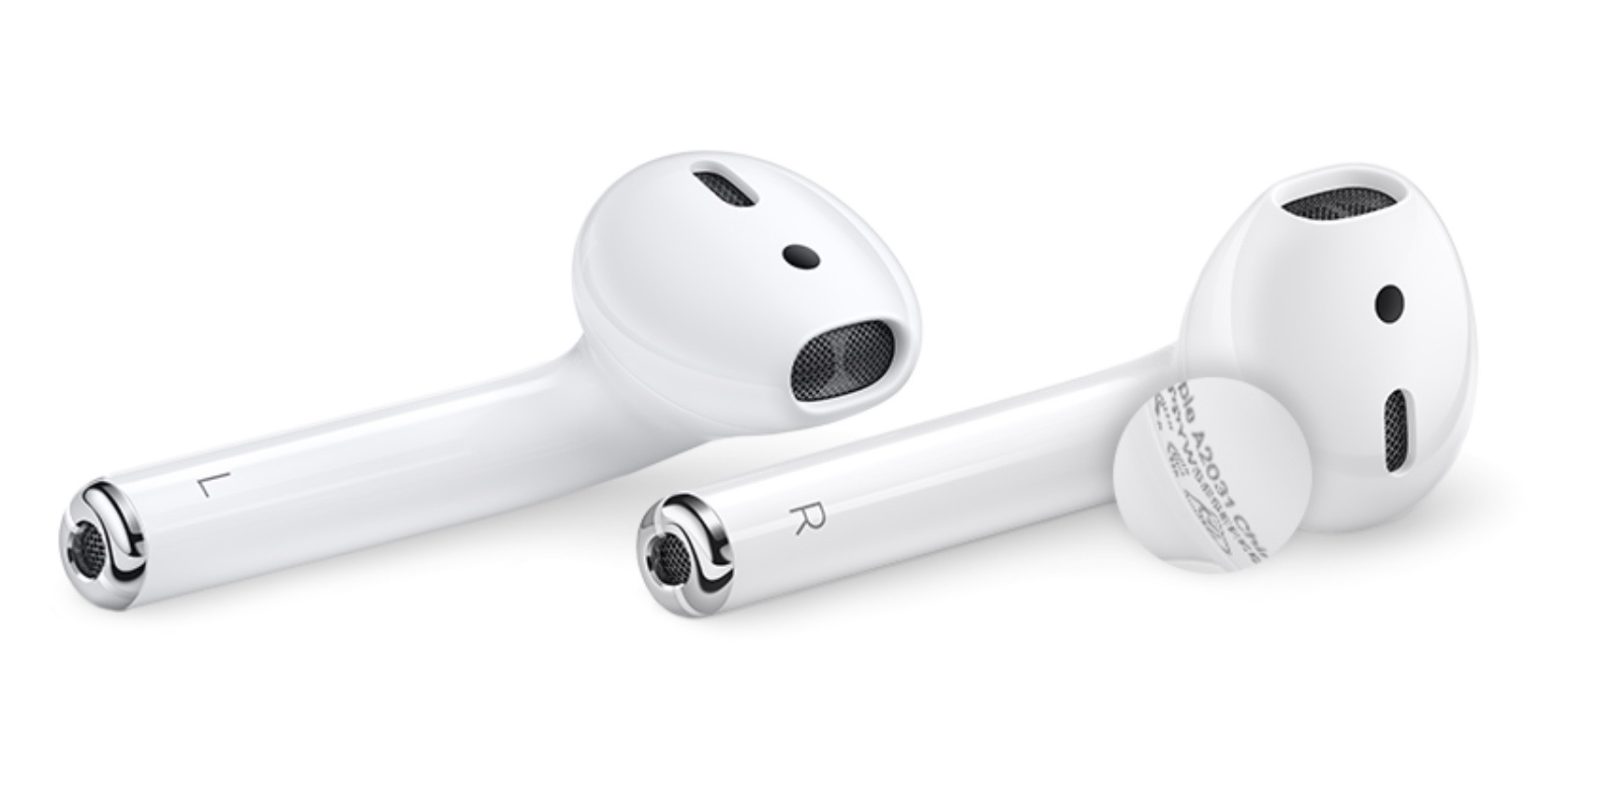 check AirPods model